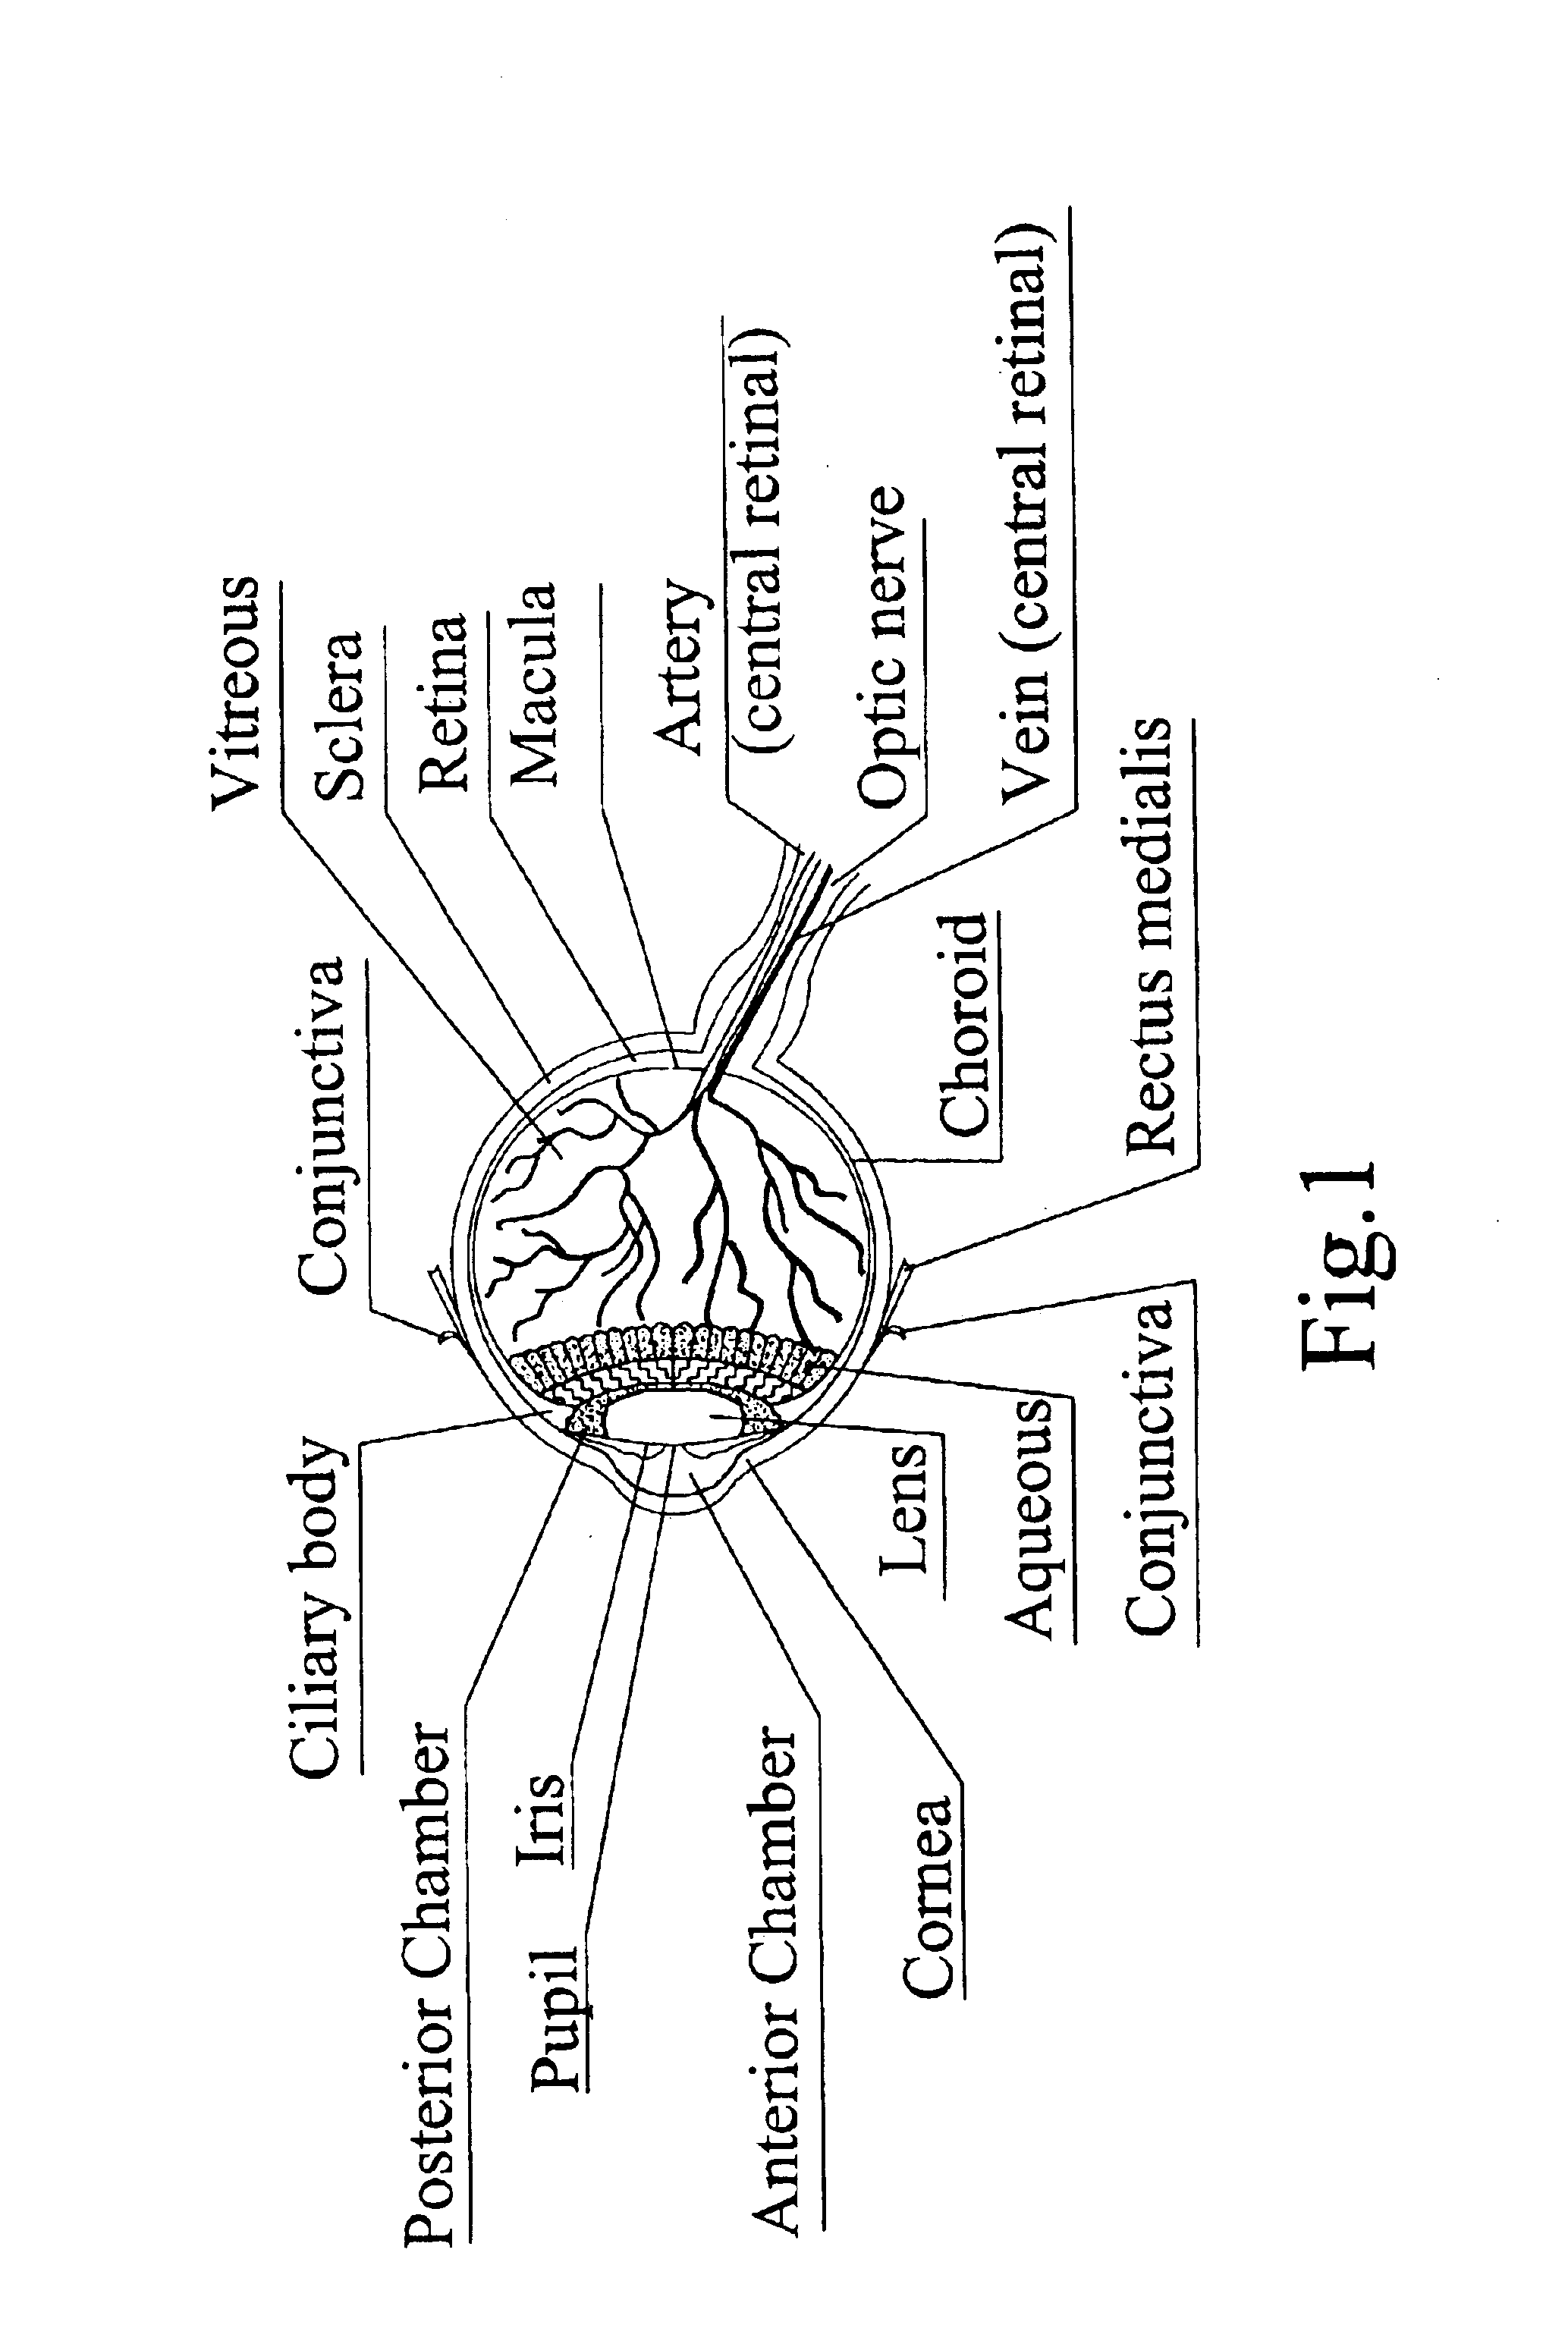 Optical device for intraocular observation